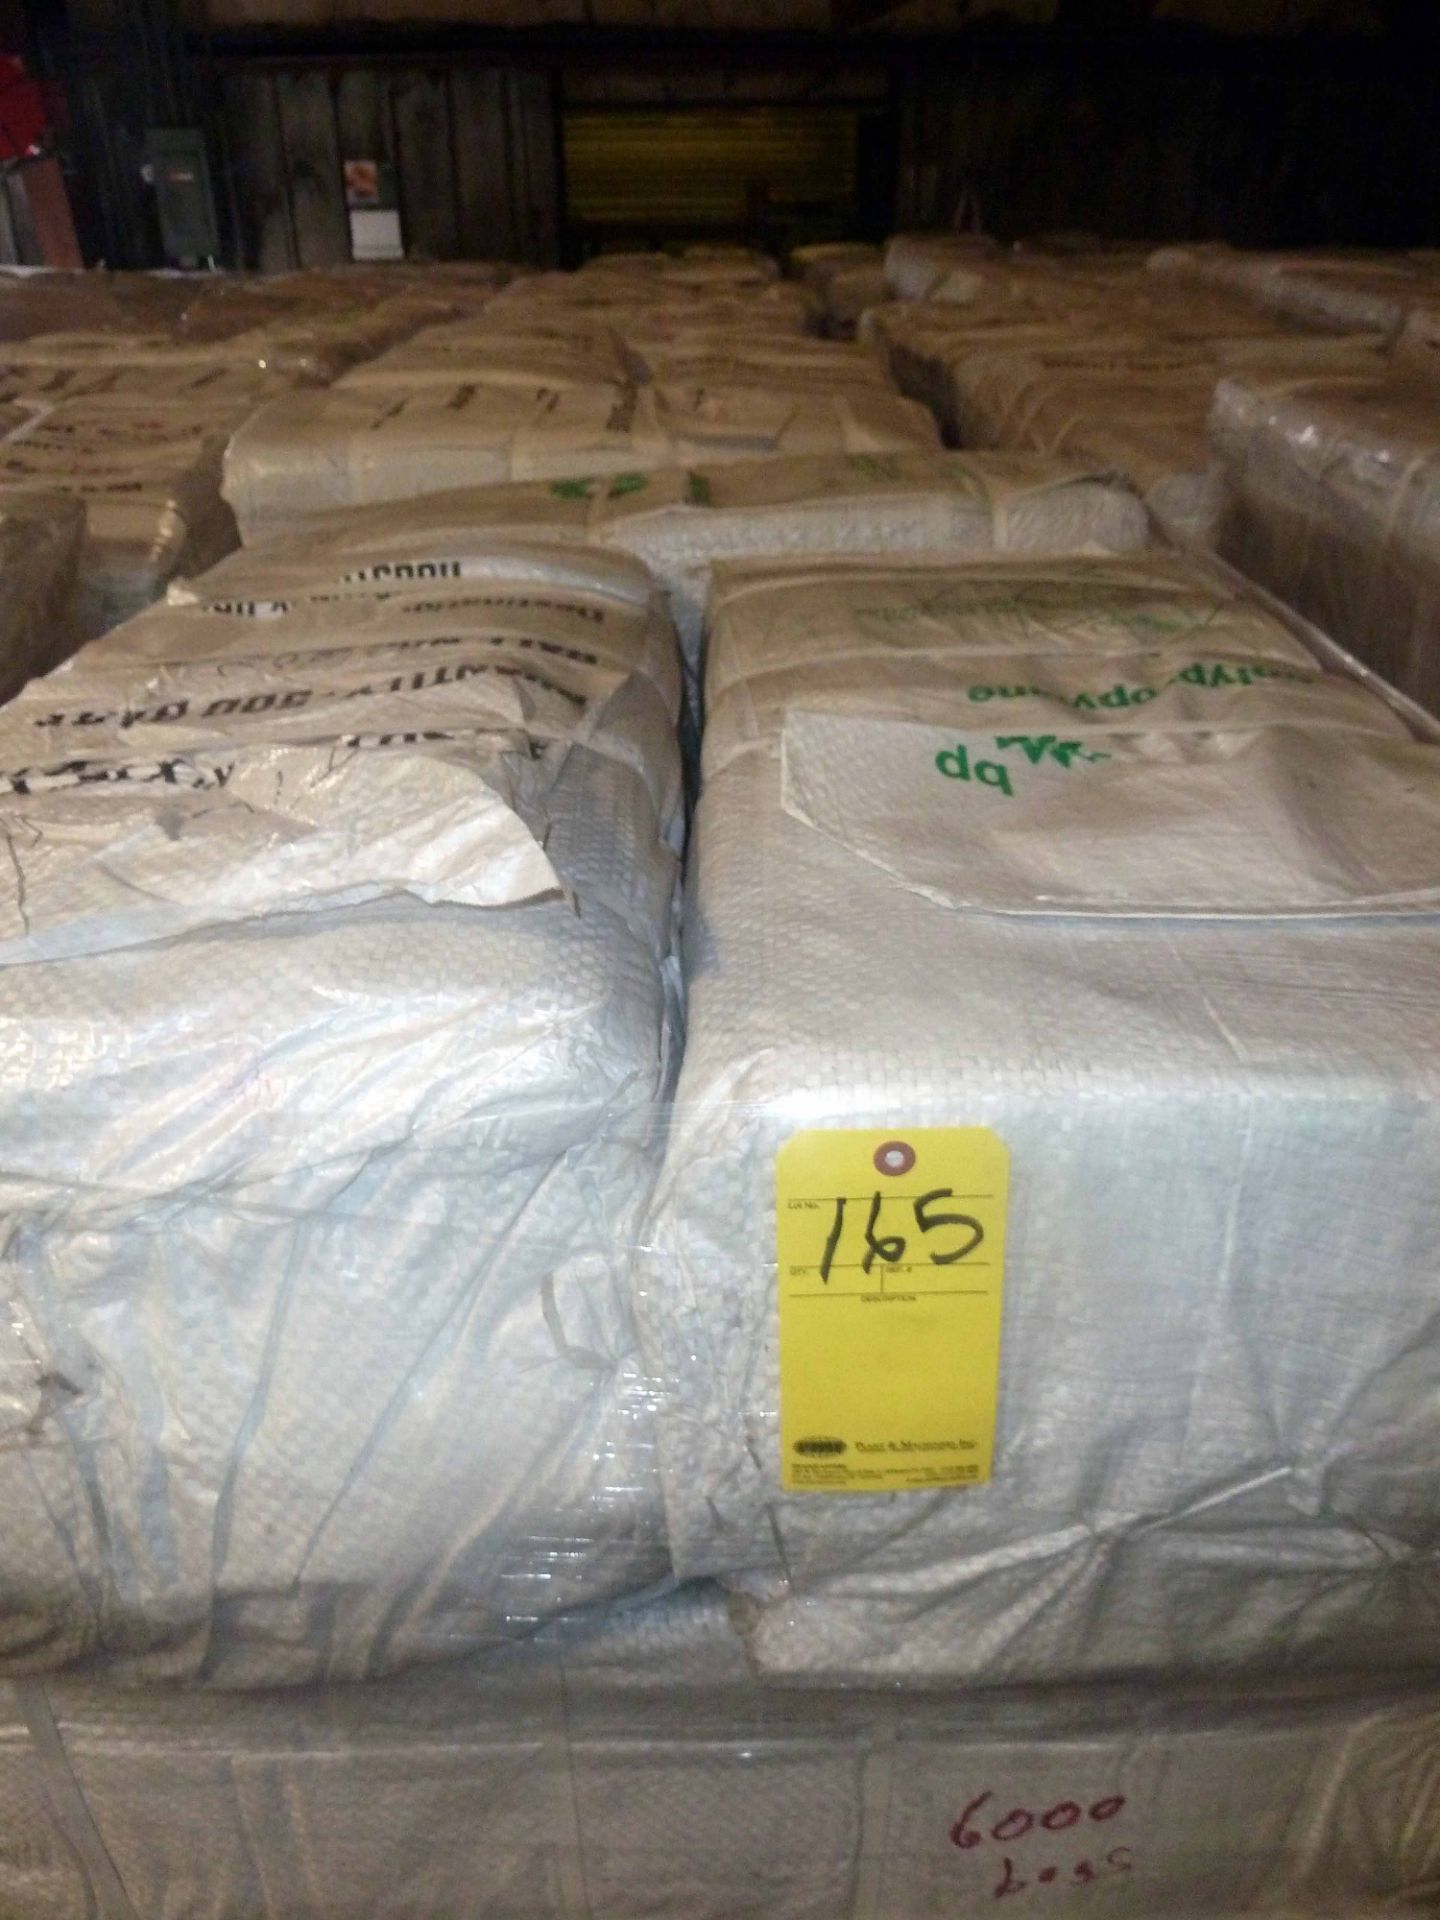 LOT OF PALLETIZED WOVEN BAGS, APPROX. 36,000 BAGS